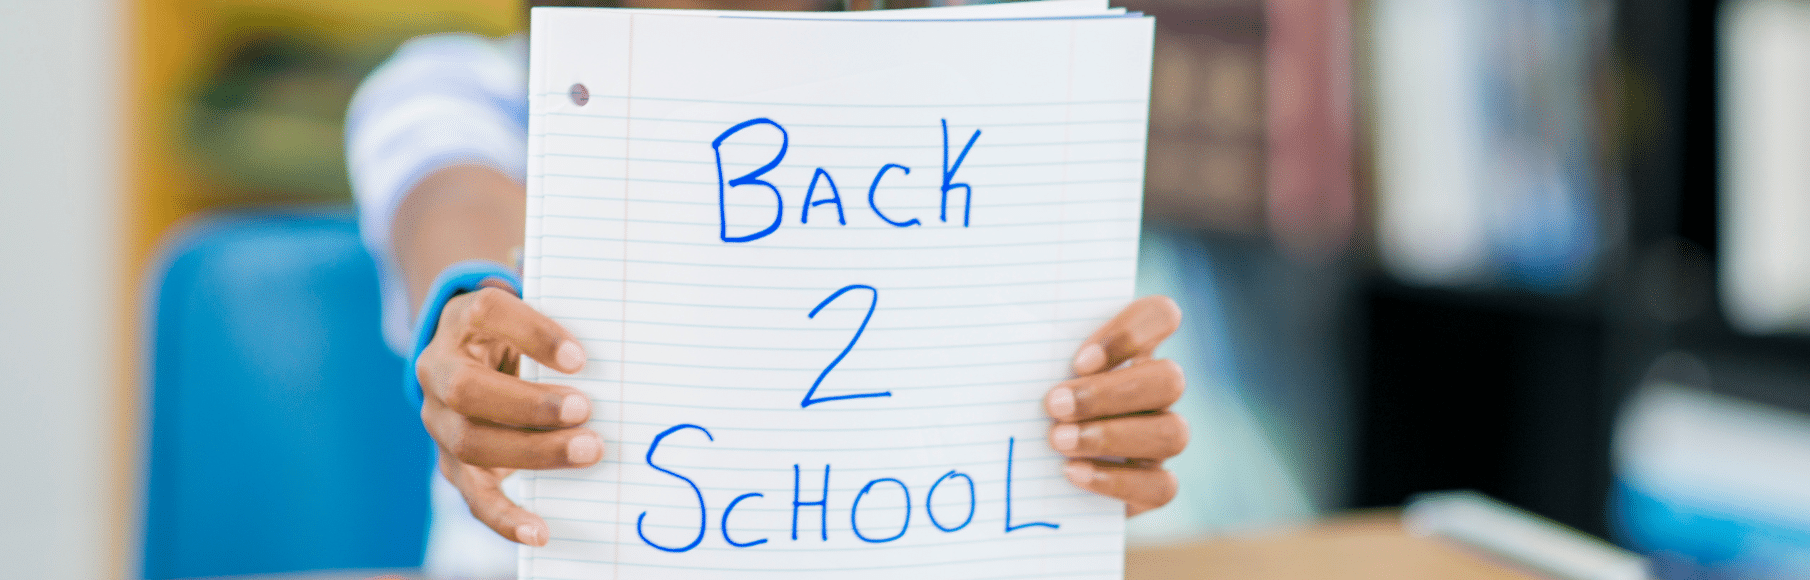 Girl Holding Up Paper with Back 2 School written in blue marker